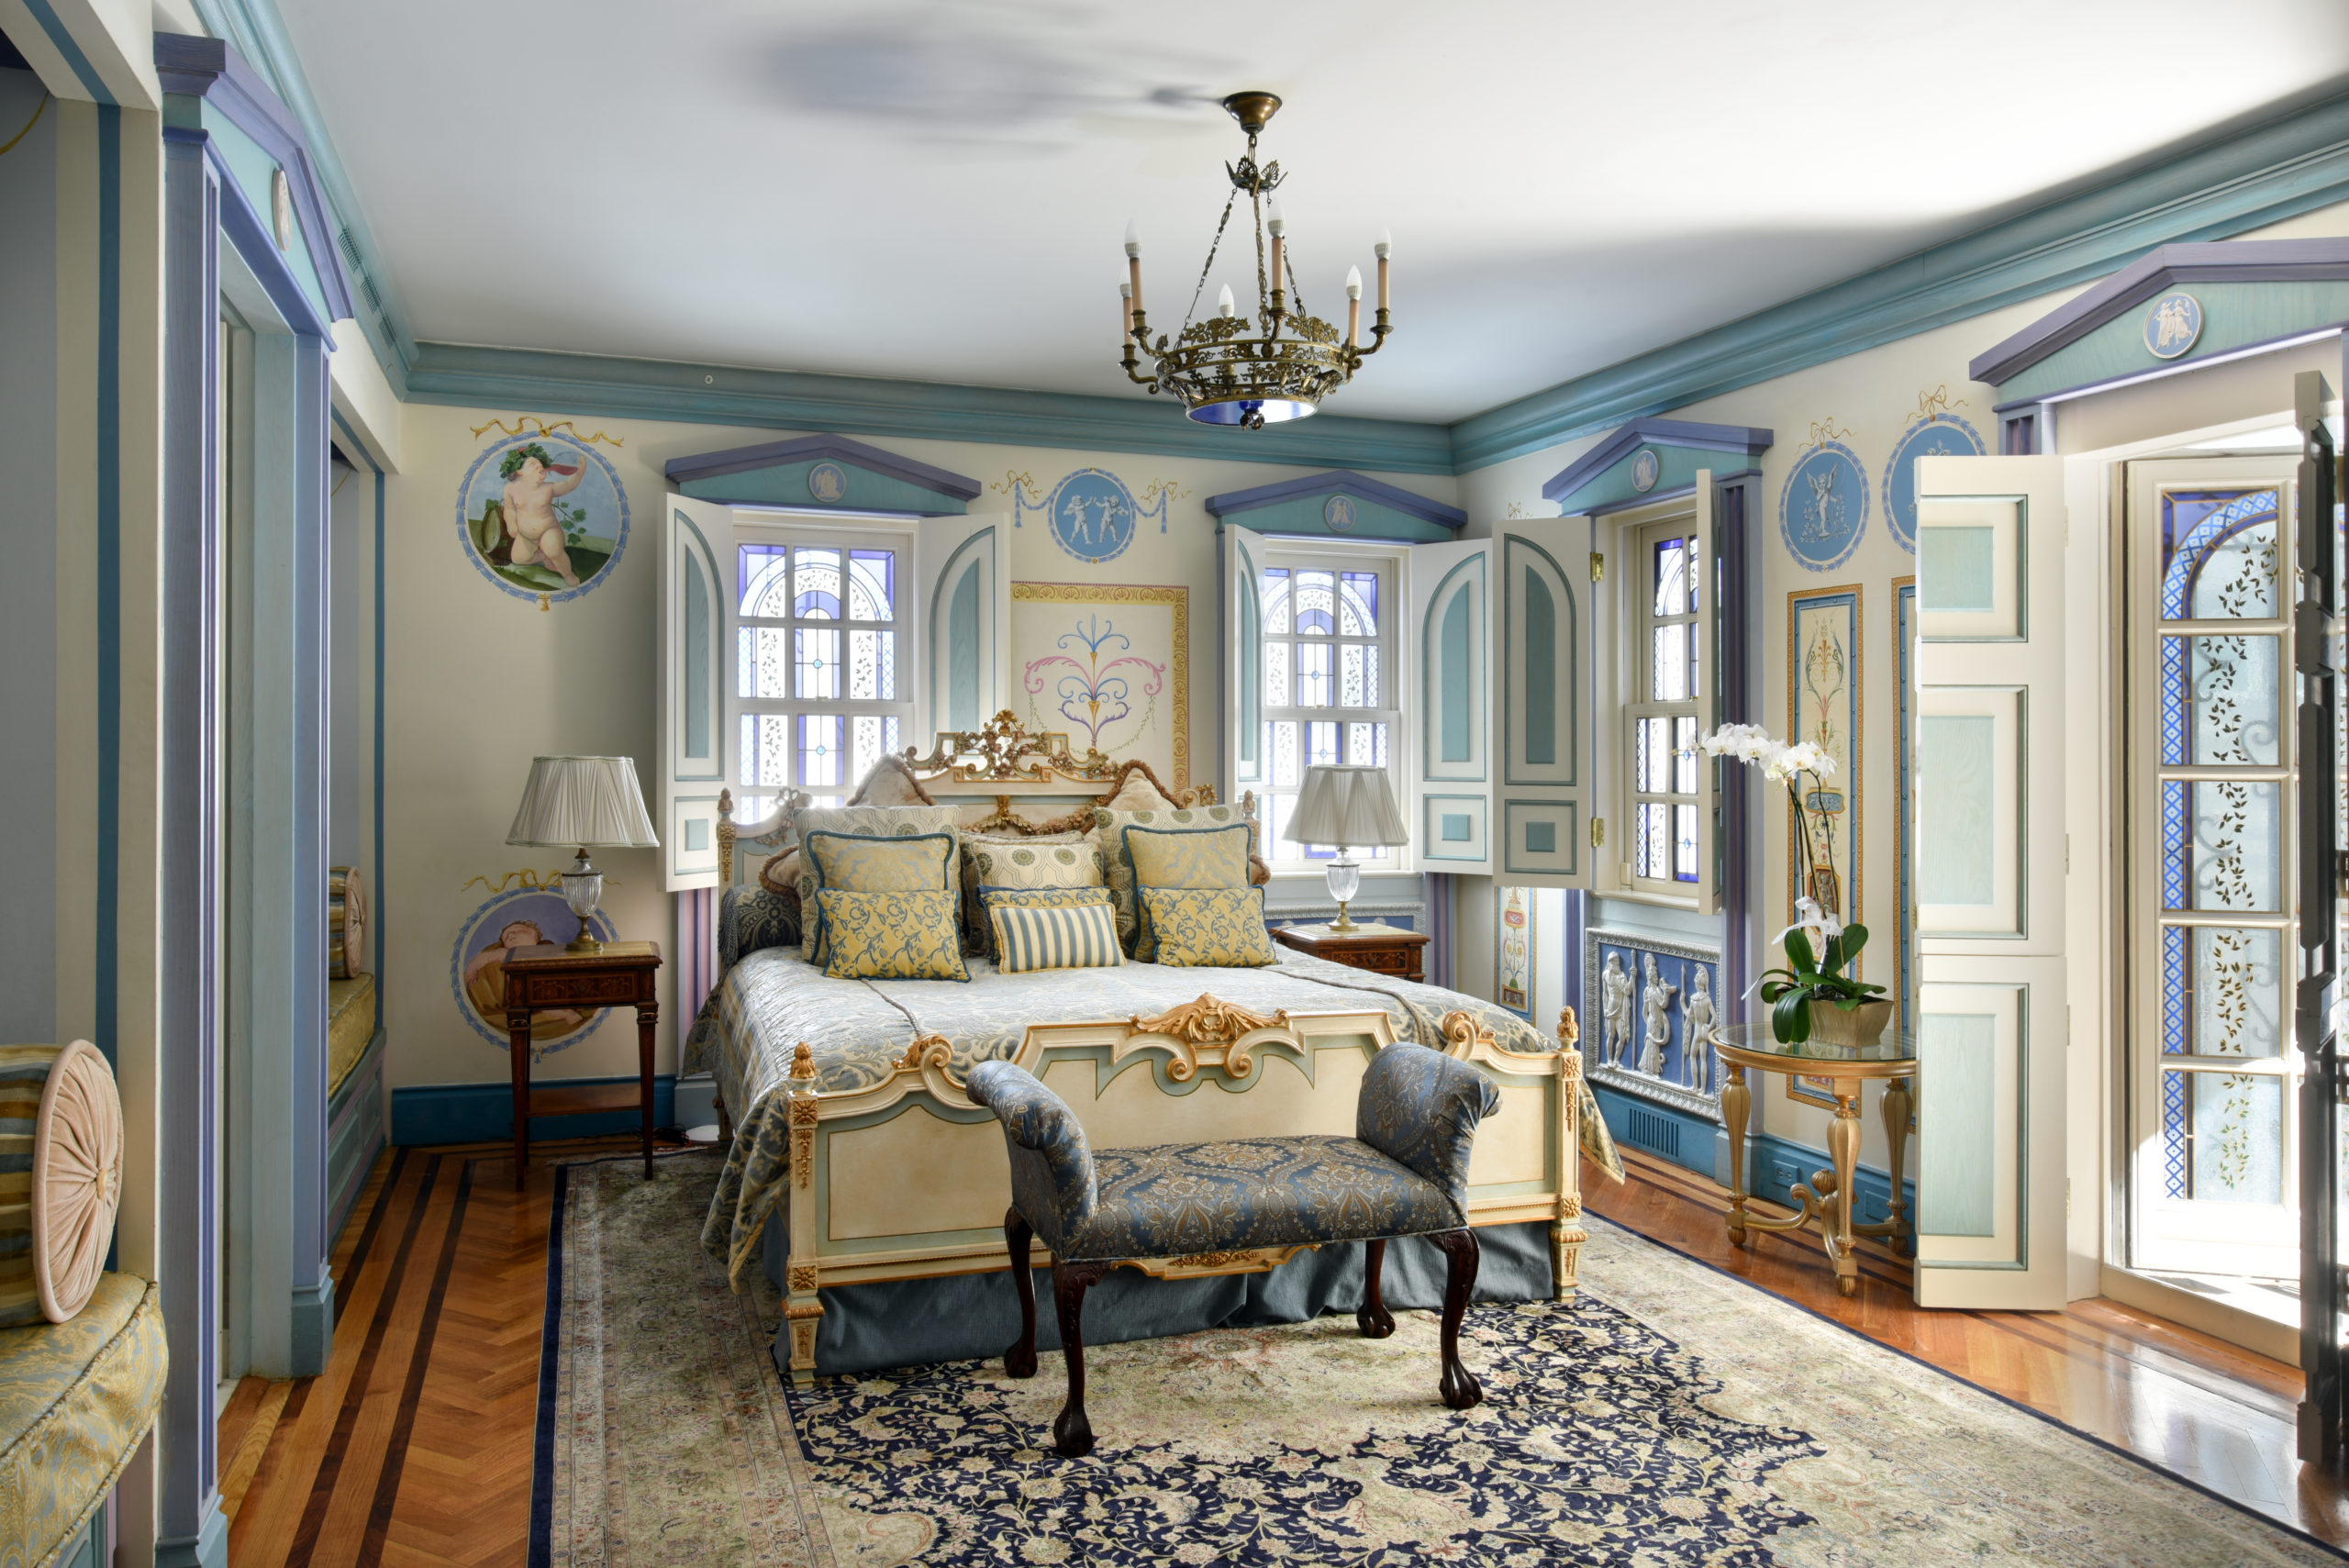 traditional style bedroom space. soft blue, lavender and beige colors. stained glass windows in 4 areas